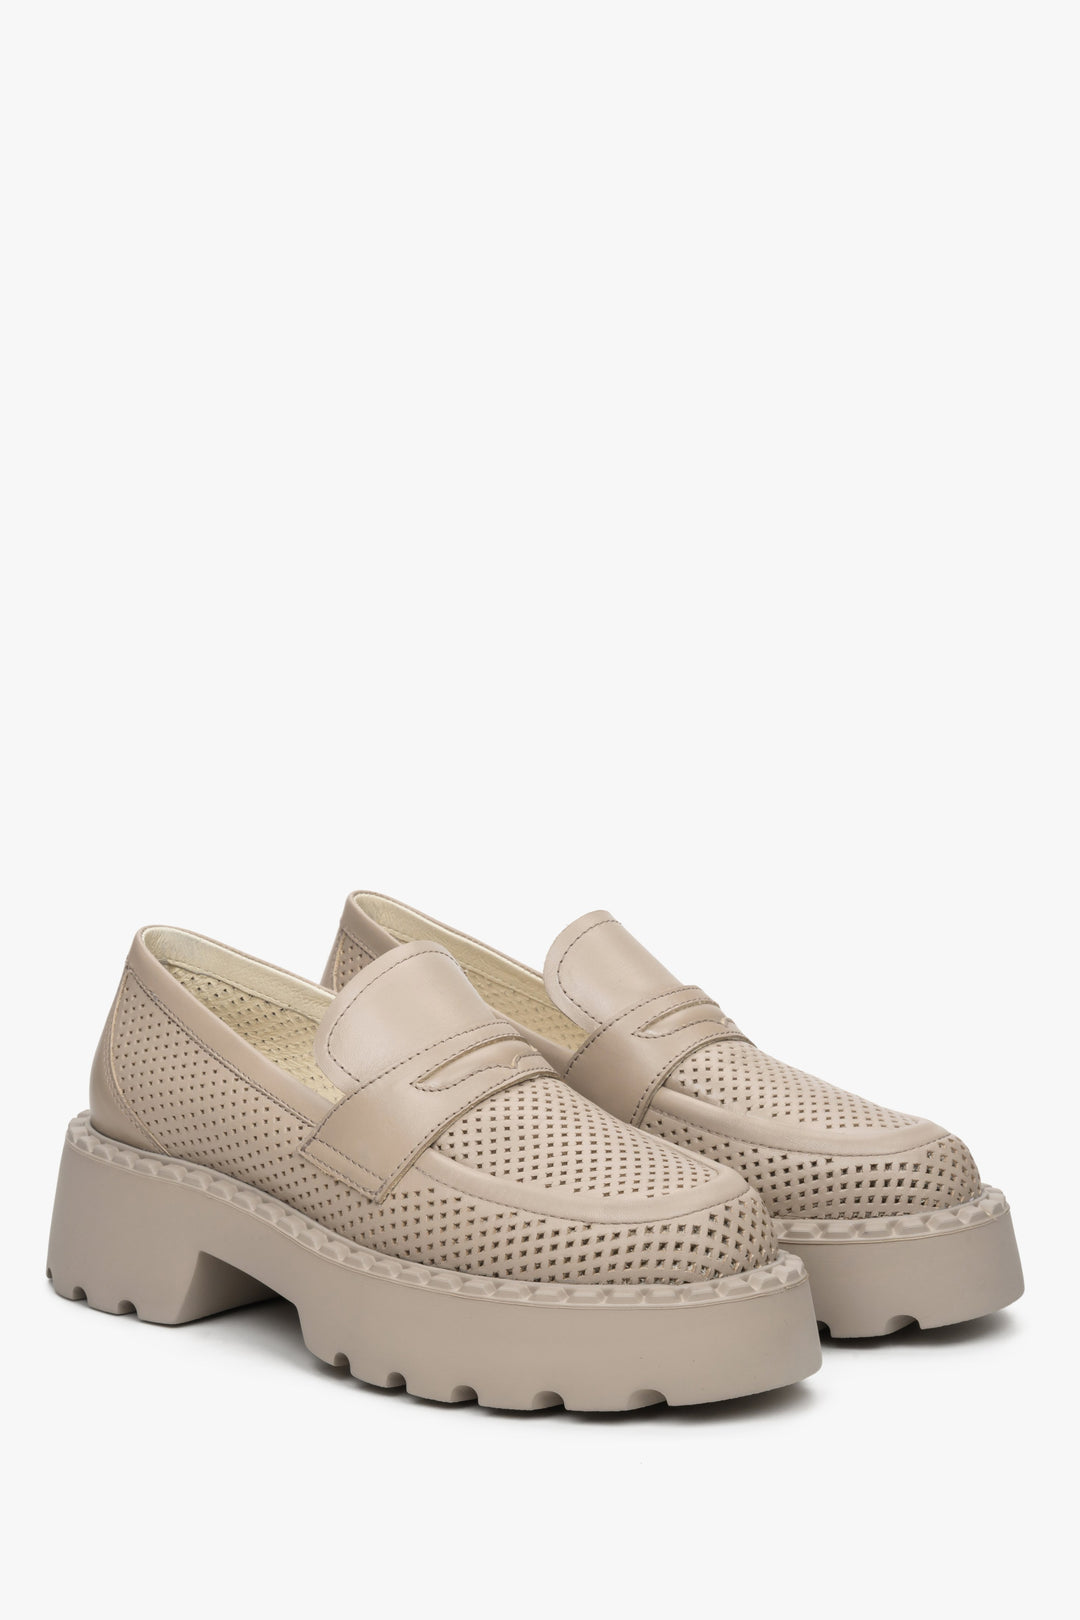 Beige leather loafers for women Estro with perforation - presentation of the top of the shoe and the side vest.